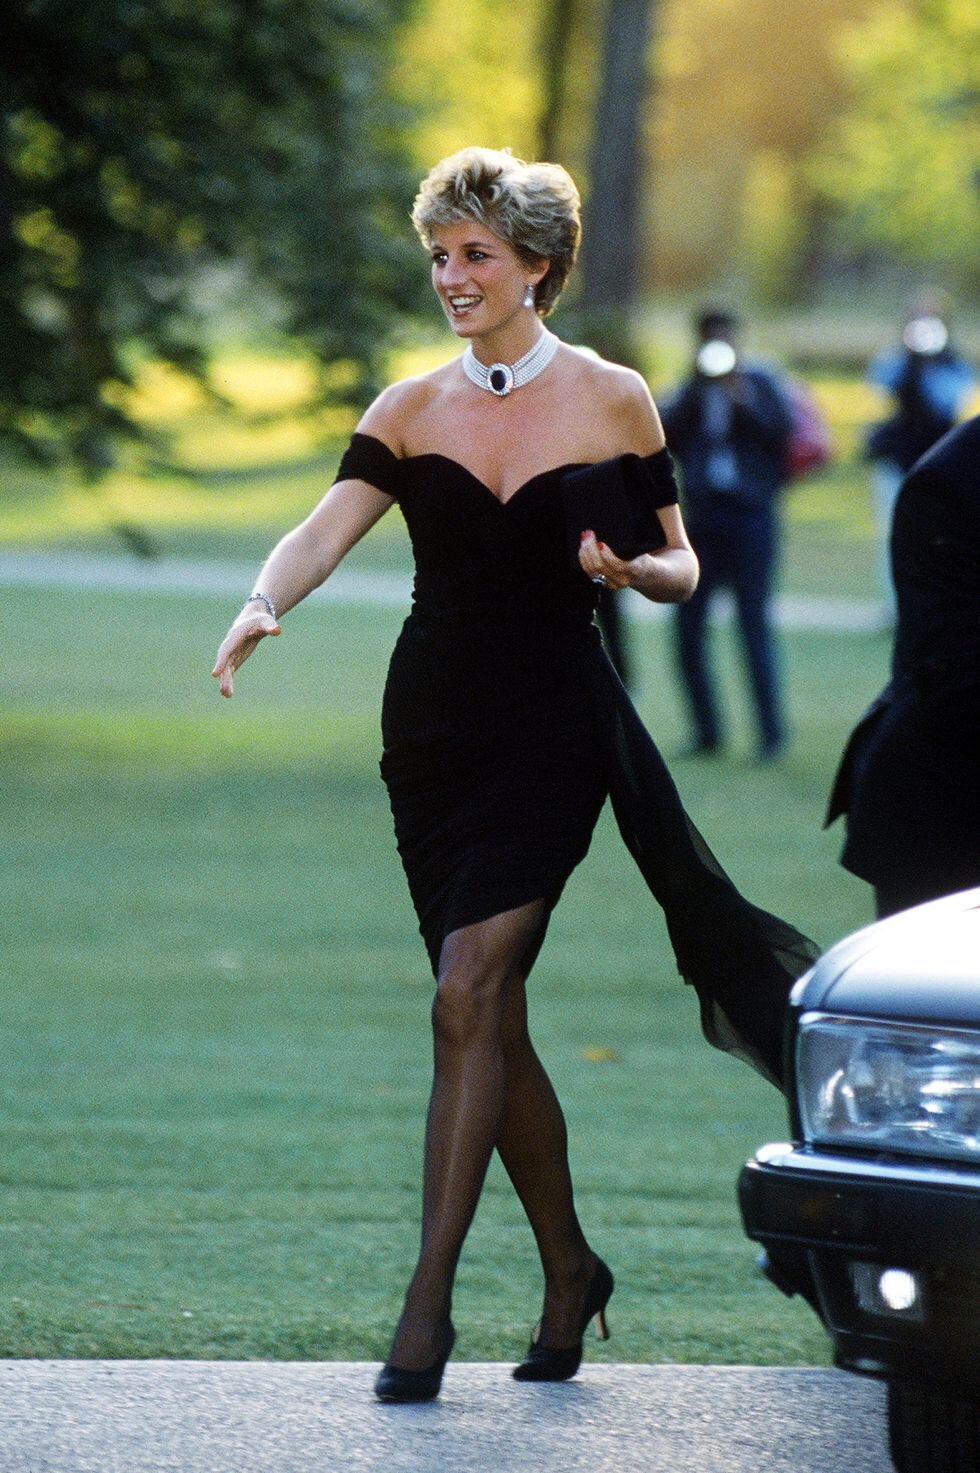 princess-diana-arriving-at-the-serpentine-gallery-london-in-news-photo-73399197-1554318302.jpg